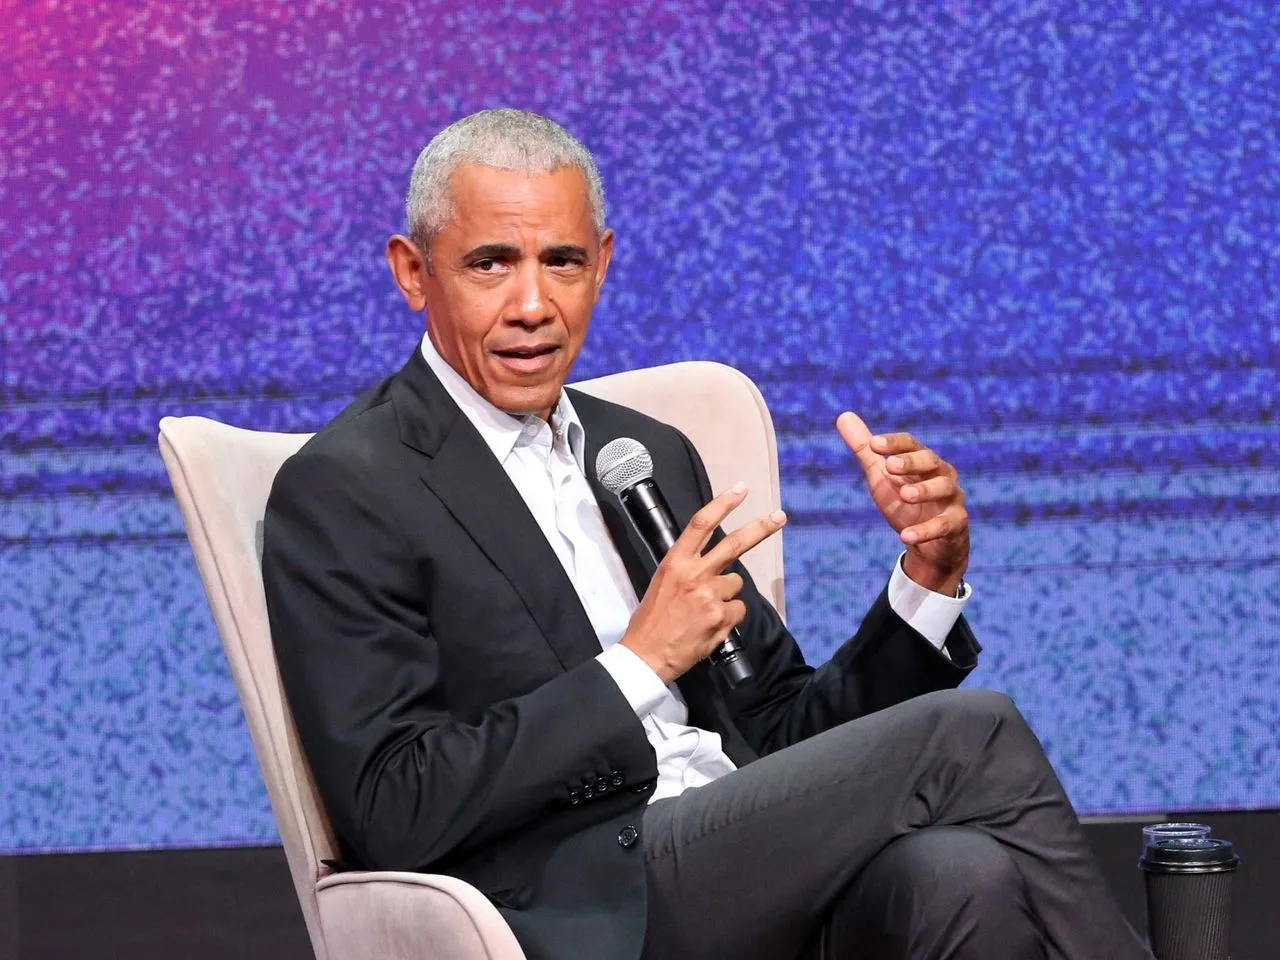 Obama Tells Public To Believe Everything on MSNBC: ‘They Don’t Make Stuff Up’